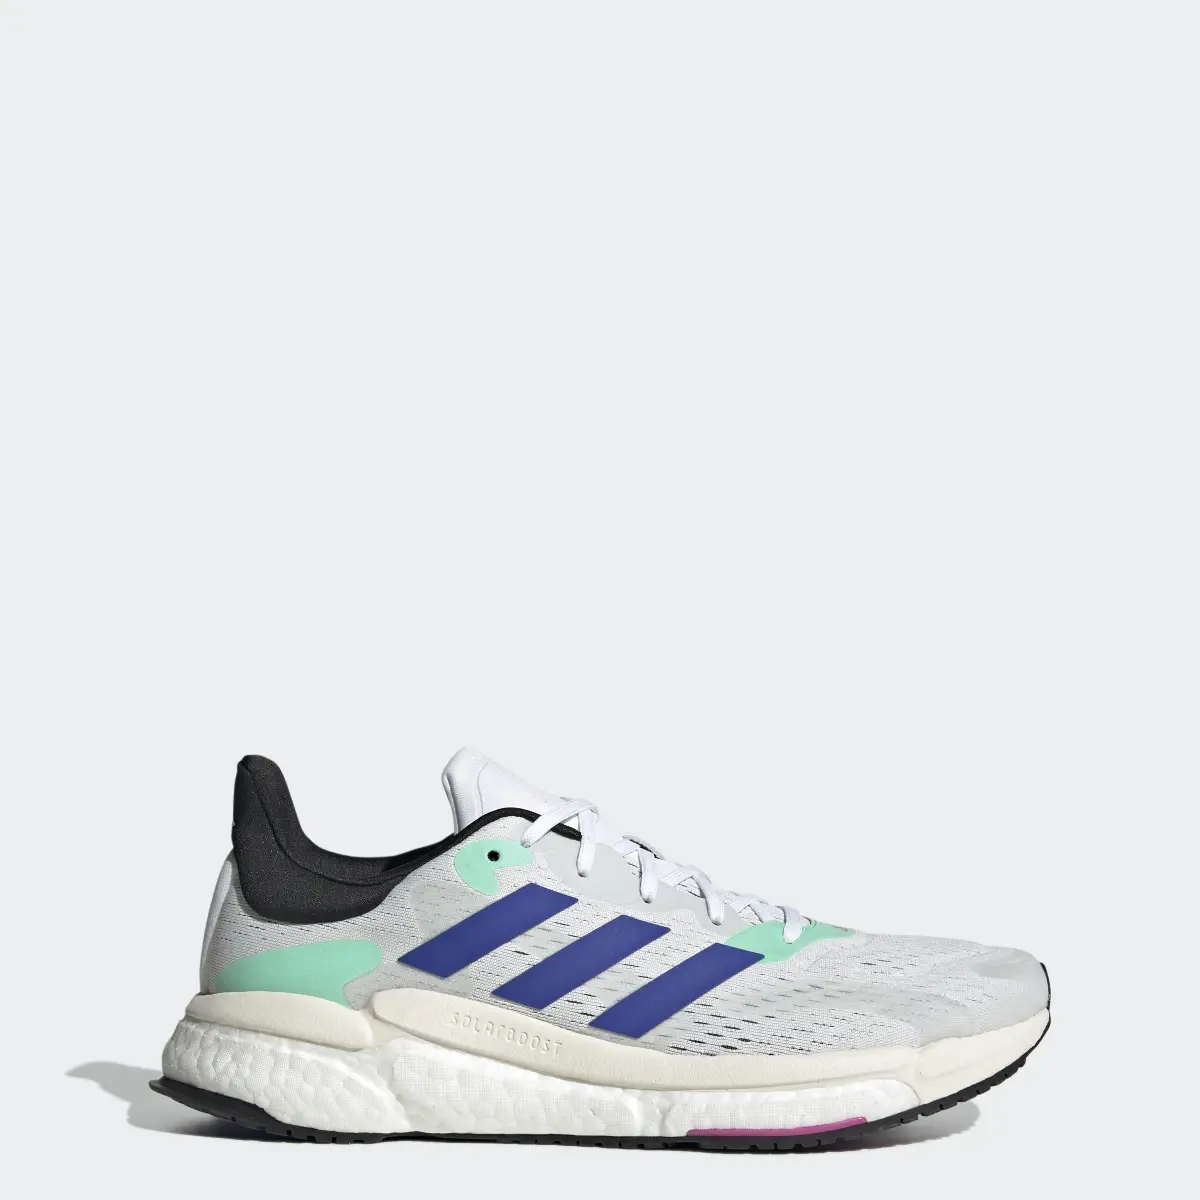 Adidas Solarboost 4 Shoes. 1